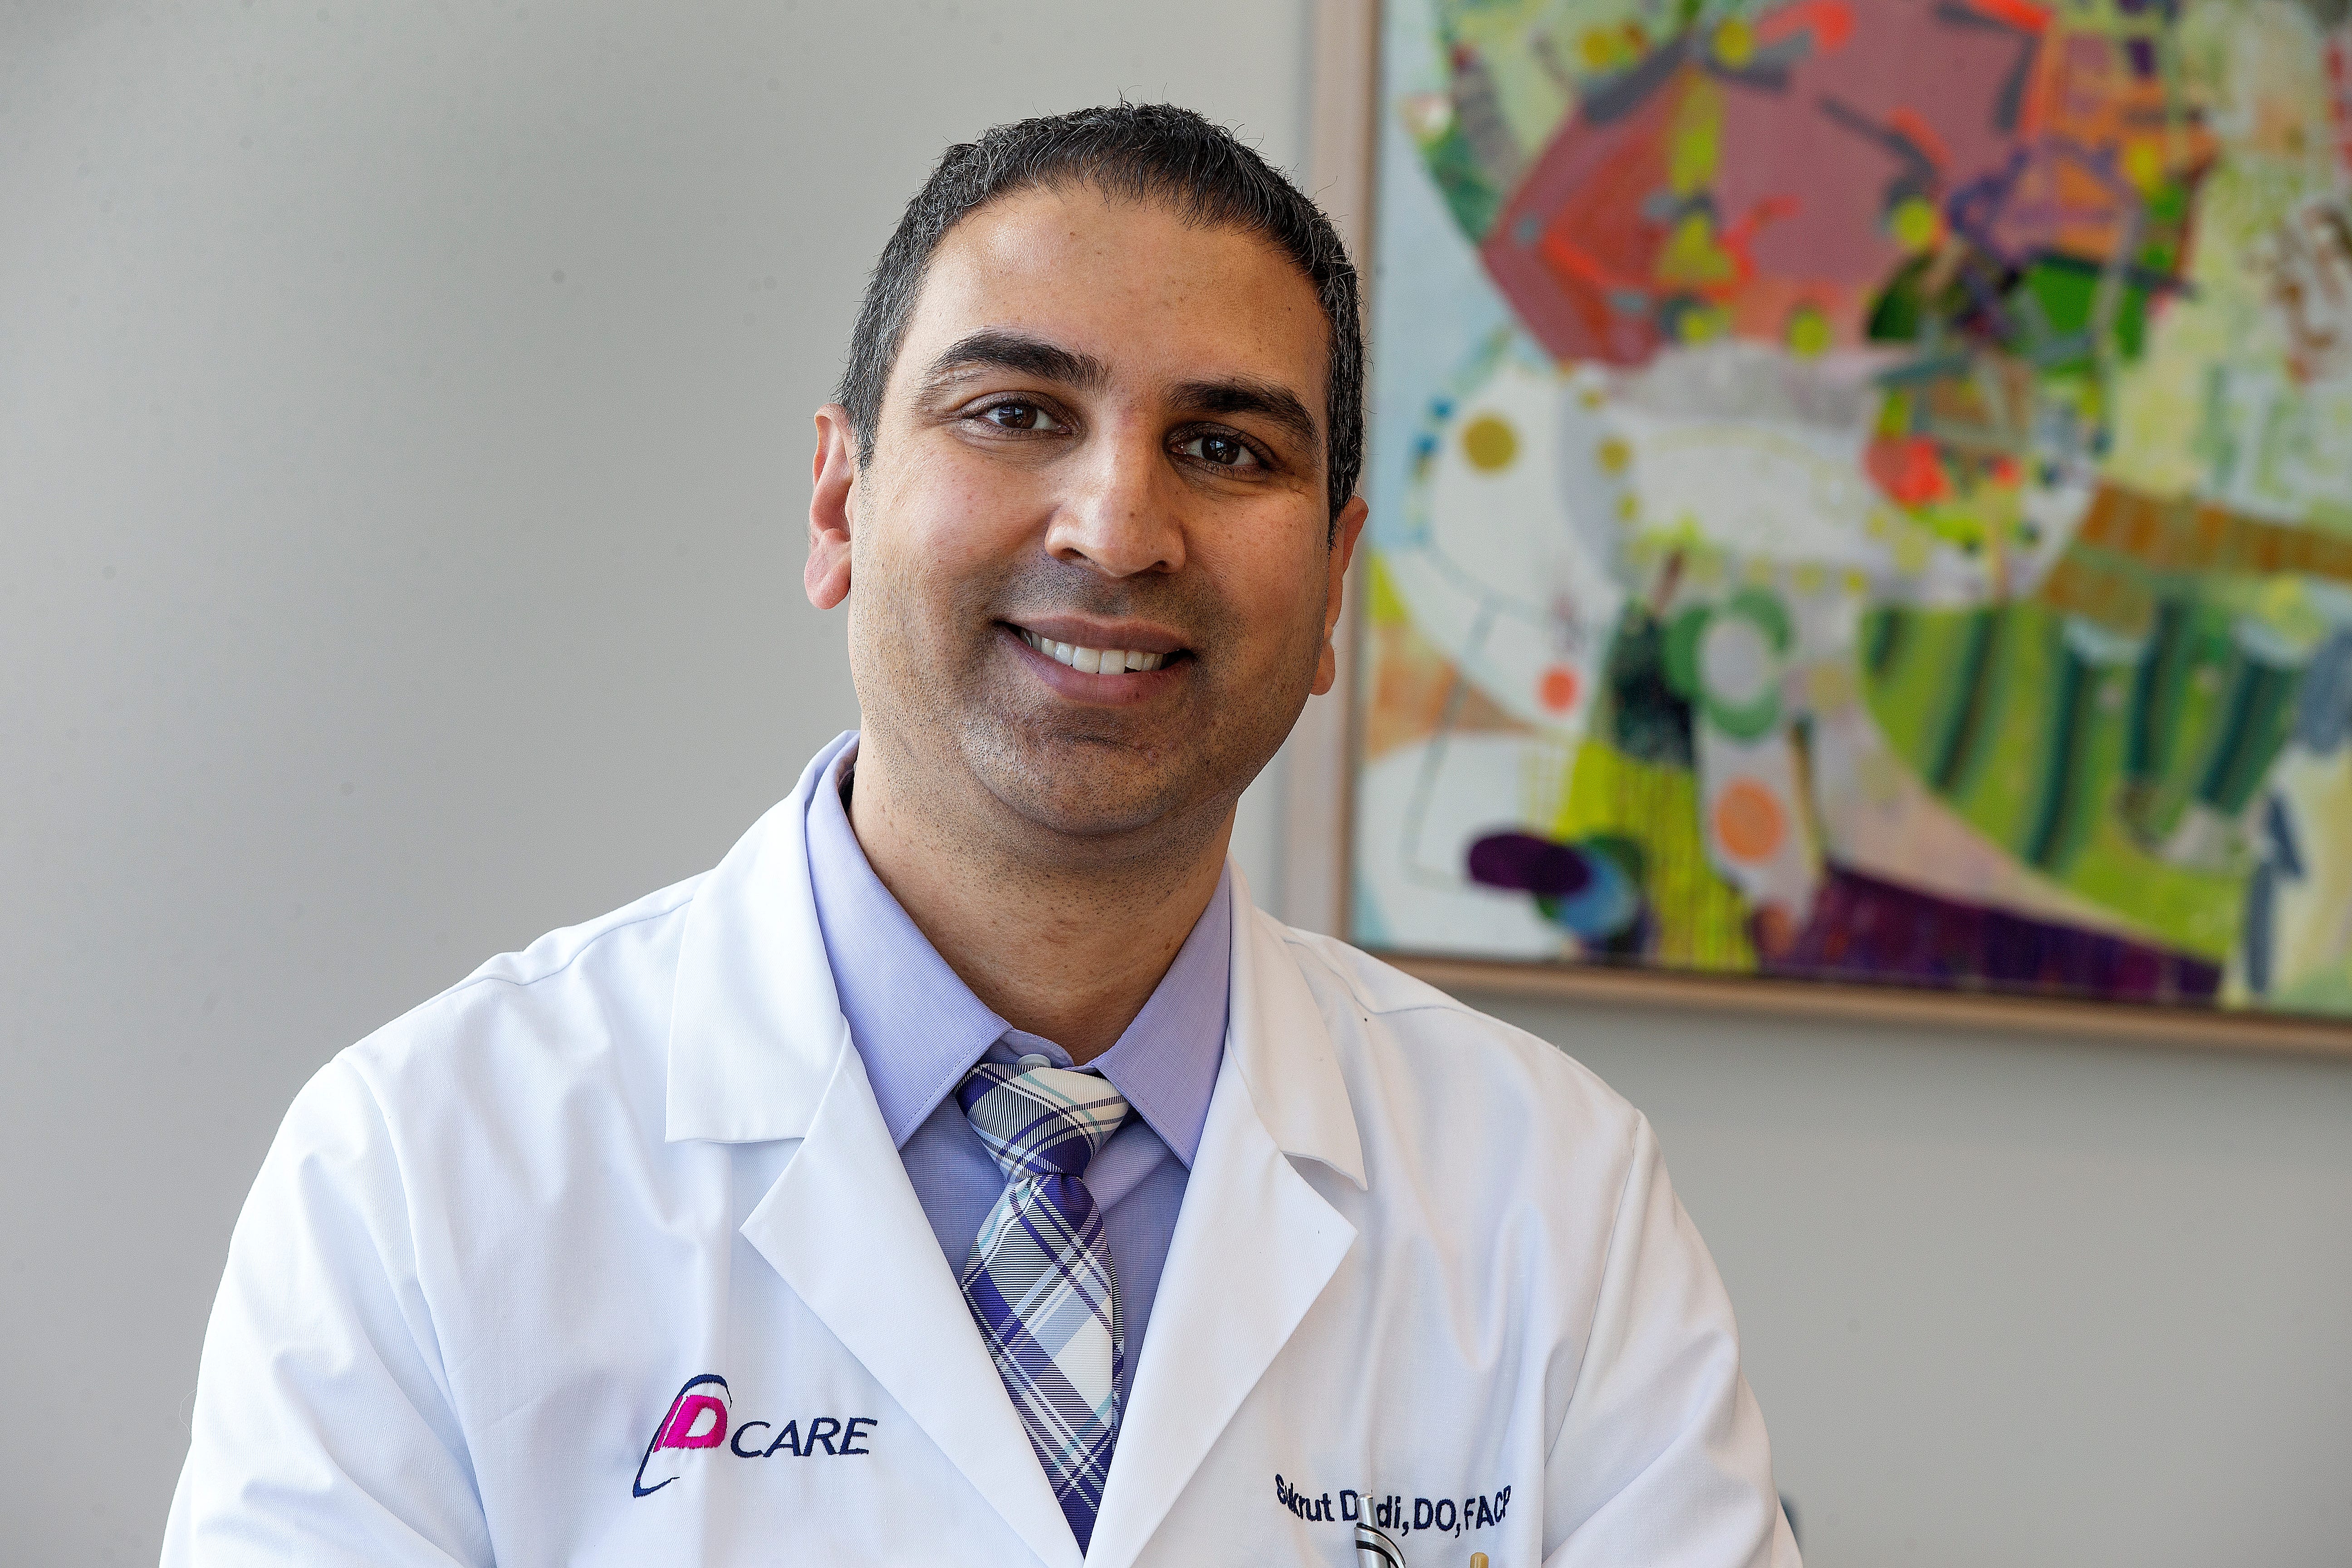 Dr. Sukrut Dwivedi, infectious disease doctor, talks about working through the COVID-19 pandemic and the impact it has had on his life at Ocean University Medical Center in Brick, NJ Friday, February 11, 2022.